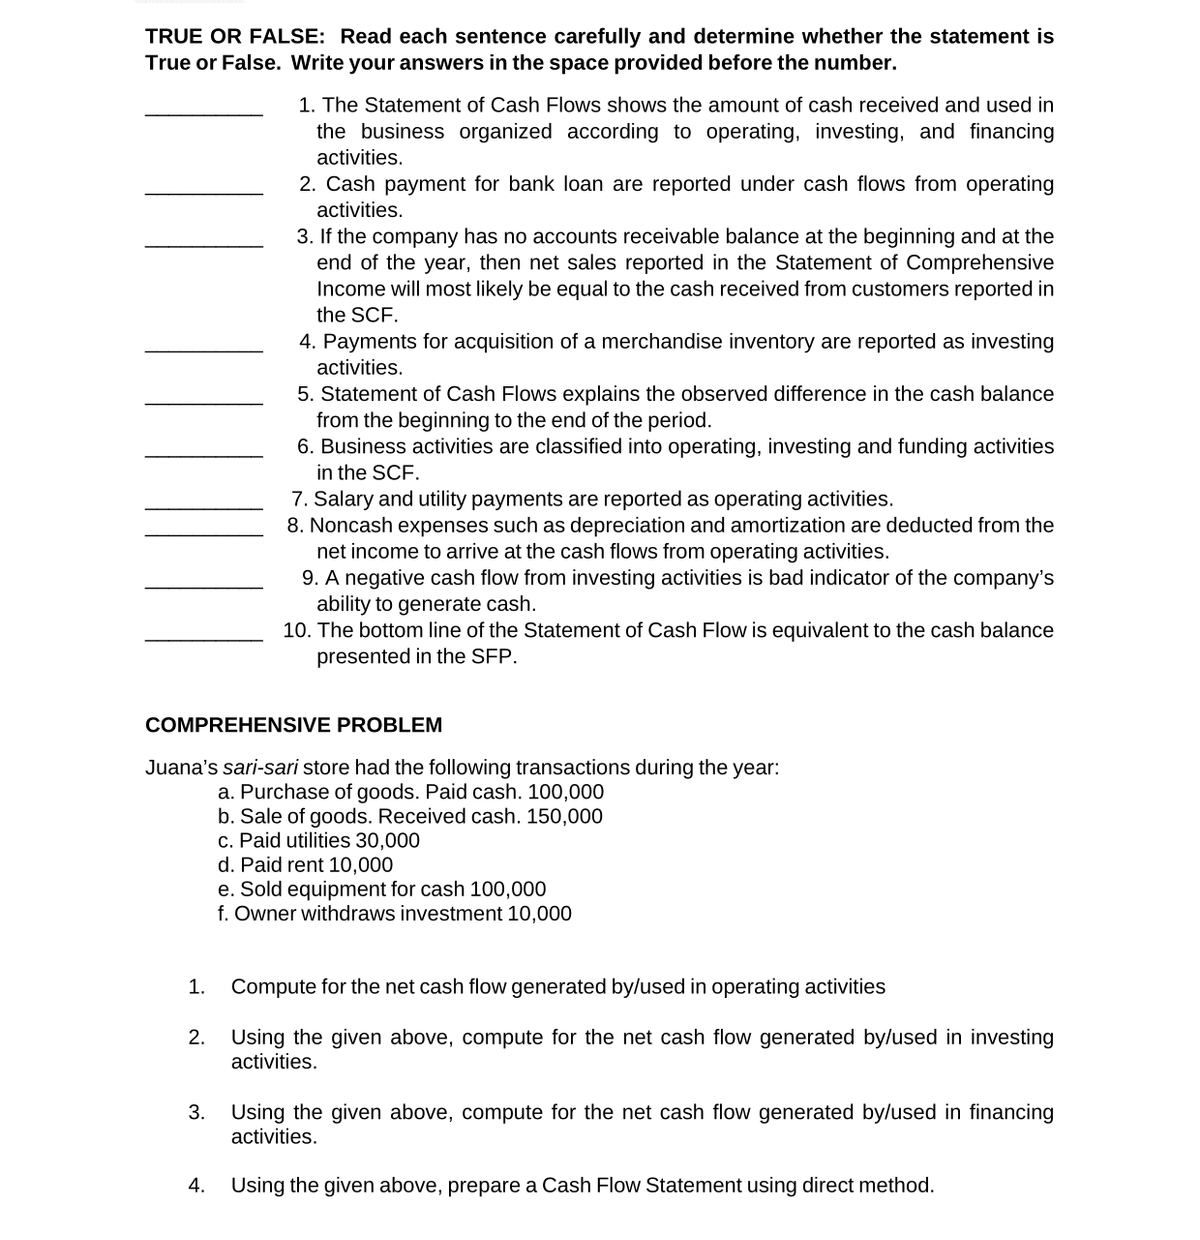 TRUE OR FALSE: Read each sentence carefully and determine whether the statement is
True or False. Write your answers in the space provided before the number.
1. The Statement of Cash Flows shows the amount of cash received and used in
the business organized according to operating, investing, and financing
activities.
2. Cash payment for bank loan are reported under cash flows from operating
activities.
3. If the company has no accounts receivable balance at the beginning and at the
end of the year, then net sales reported in the Statement of Comprehensive
Income will most likely be equal to the cash received from customers reported in
the SCF.
4. Payments for acquisition of a merchandise inventory are reported as investing
activities.
5. Statement of Cash Flows explains the observed difference in the cash balance
from the beginning to the end of the period.
6. Business activities are classified into operating, investing and funding activities
in the SCF.
7. Salary and utility payments are reported as operating activities.
8. Noncash expenses such as depreciation and amortization are deducted from the
net income to arrive at the cash flows from operating activities.
9. A negative cash flow from investing activities is bad indicator of the company's
ability to generate cash.
10. The bottom line of the Statement of Cash Flow is equivalent to the cash balance
presented in the SFP.
COMPREHENSIVE PROBLEM
Juana's sari-sari store had the following transactions during the year:
a. Purchase of goods. Paid cash. 100,000
b. Sale of goods. Received cash. 150,000
c. Paid utilities 30,000
d. Paid rent 10,000
e. Sold equipment for cash 100,000
f. Owner withdraws investment 10,000
1.
Compute for the net cash flow generated by/used in operating activities
2.
Using the given above, compute for the net cash flow generated by/used in investing
activities.
Using the given above, compute for the net cash flow generated by/used in financing
activities.
3.
4.
Using the given above, prepare a Cash Flow Statement using direct method.
